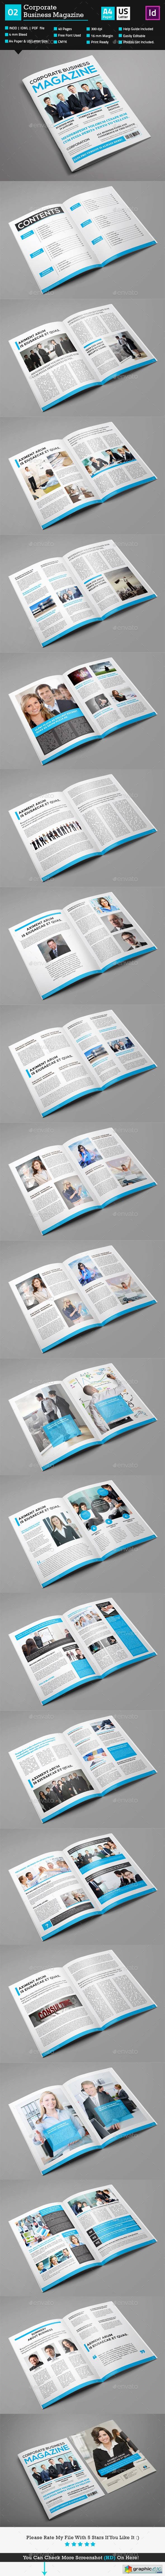 Corporate Business Magazine_Indesign 40 Pages_V2